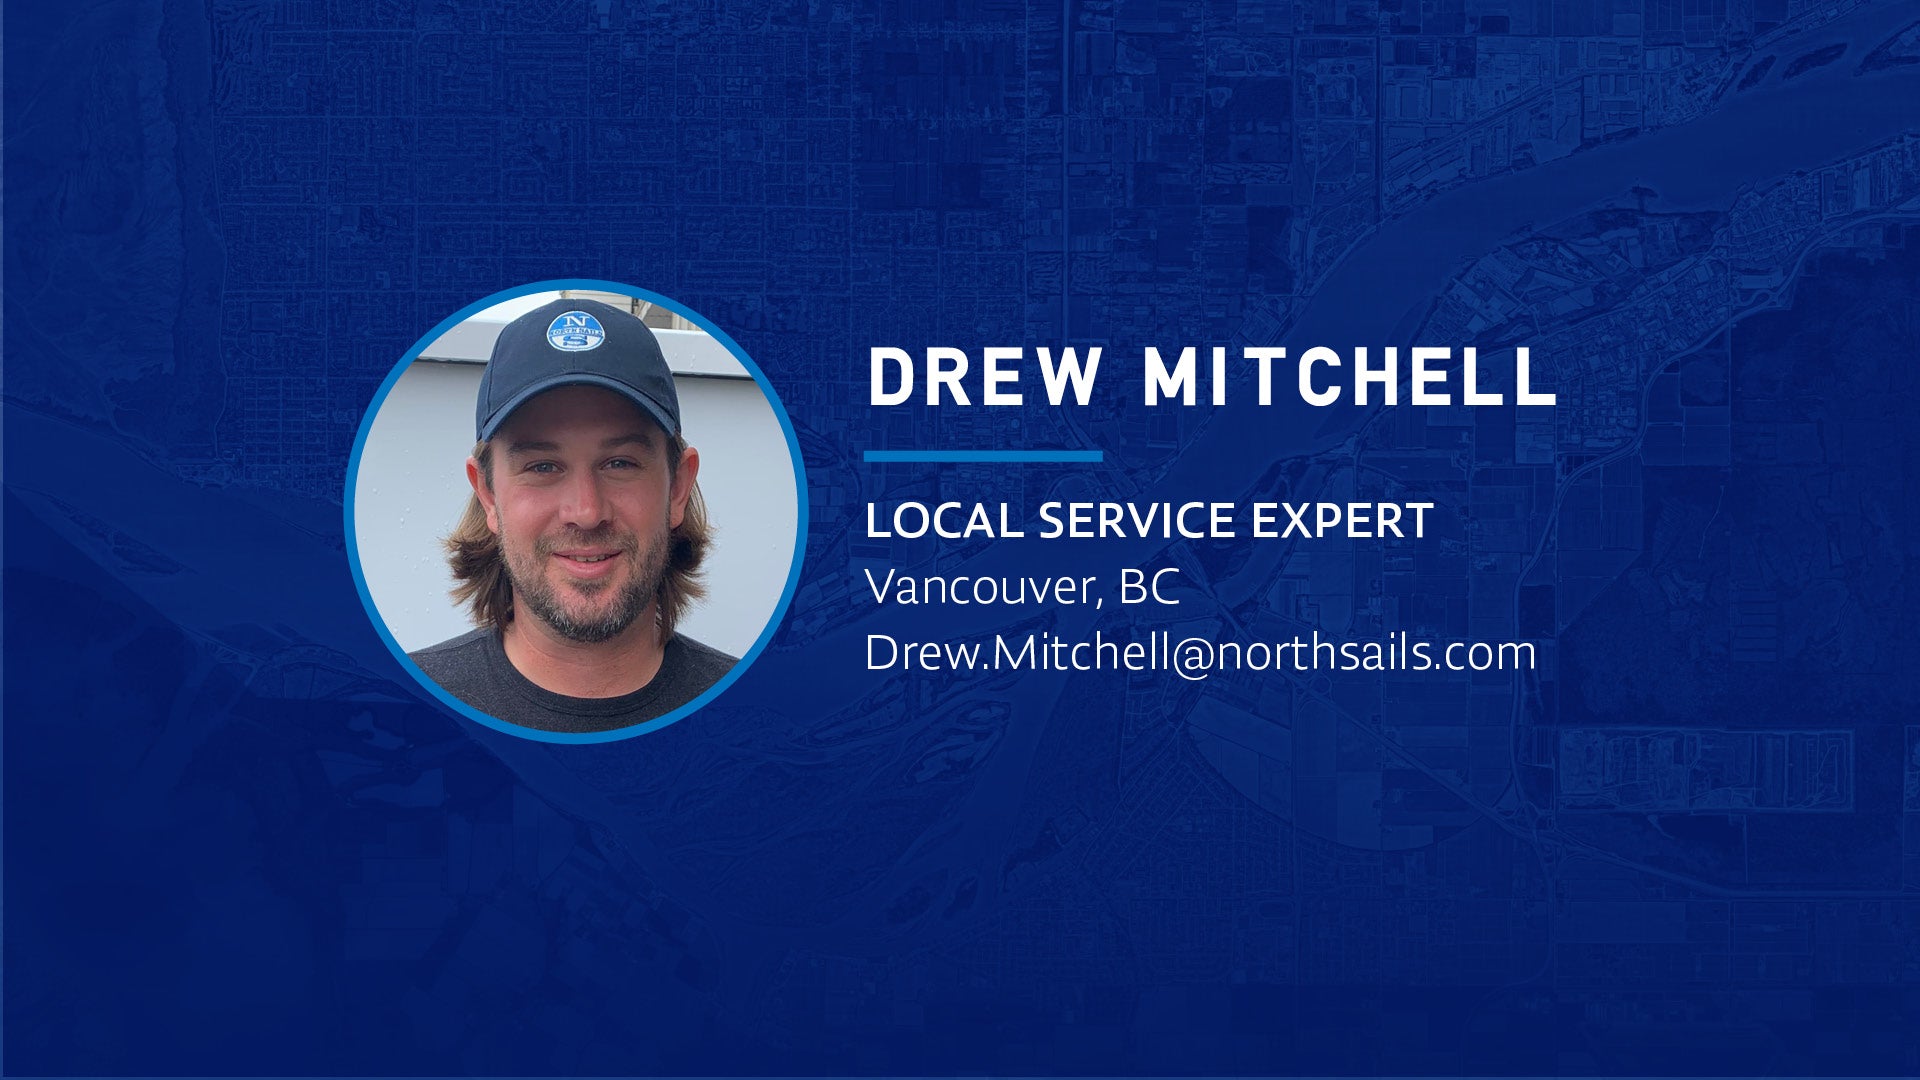 WHO WE ARE: DREW MITCHELL